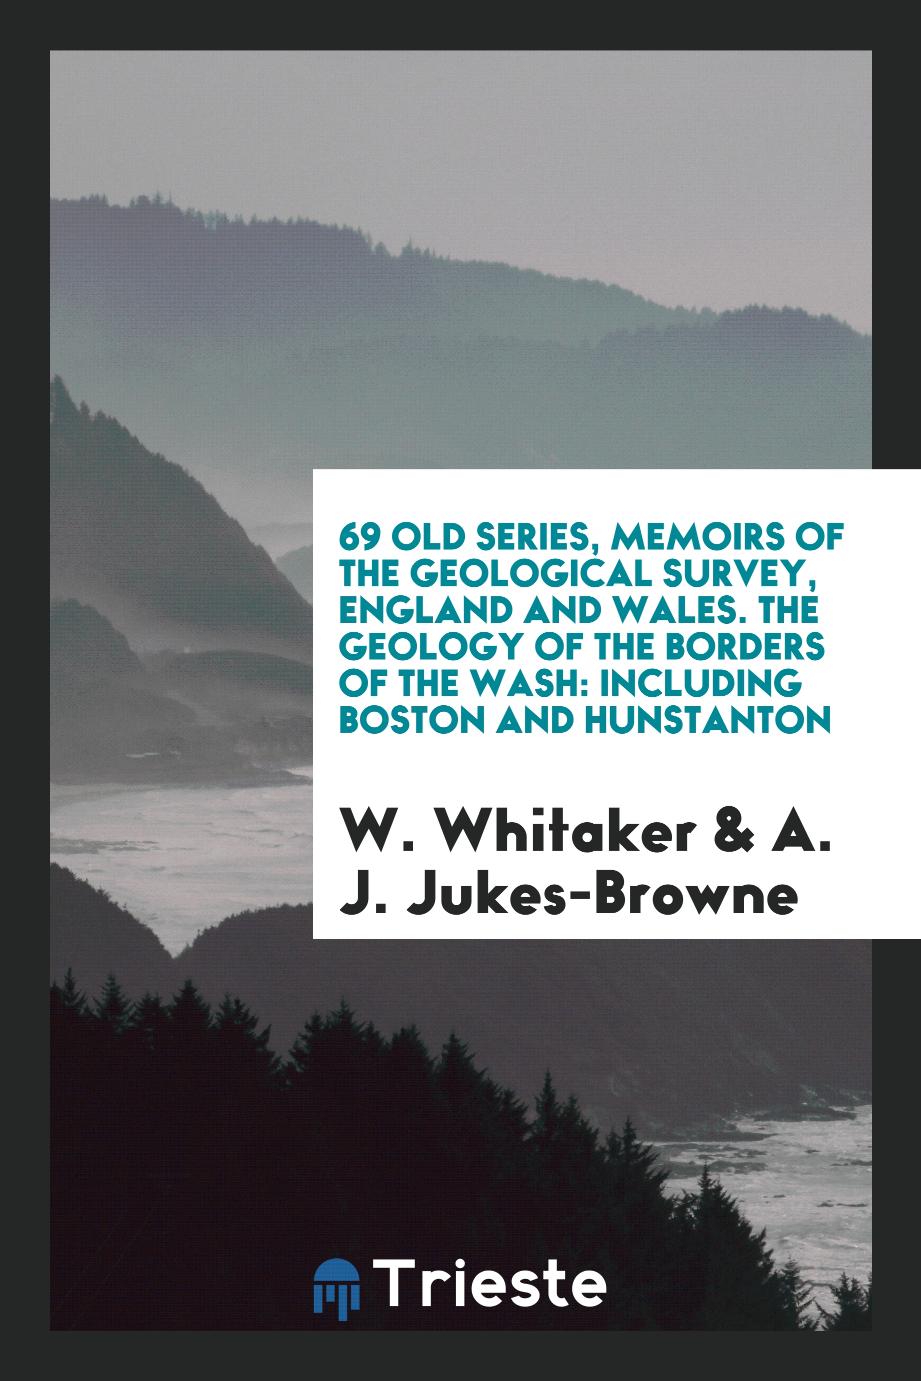 69 Old Series, Memoirs of the Geological Survey, England and Wales. The Geology of the Borders of the Wash: Including Boston and Hunstanton